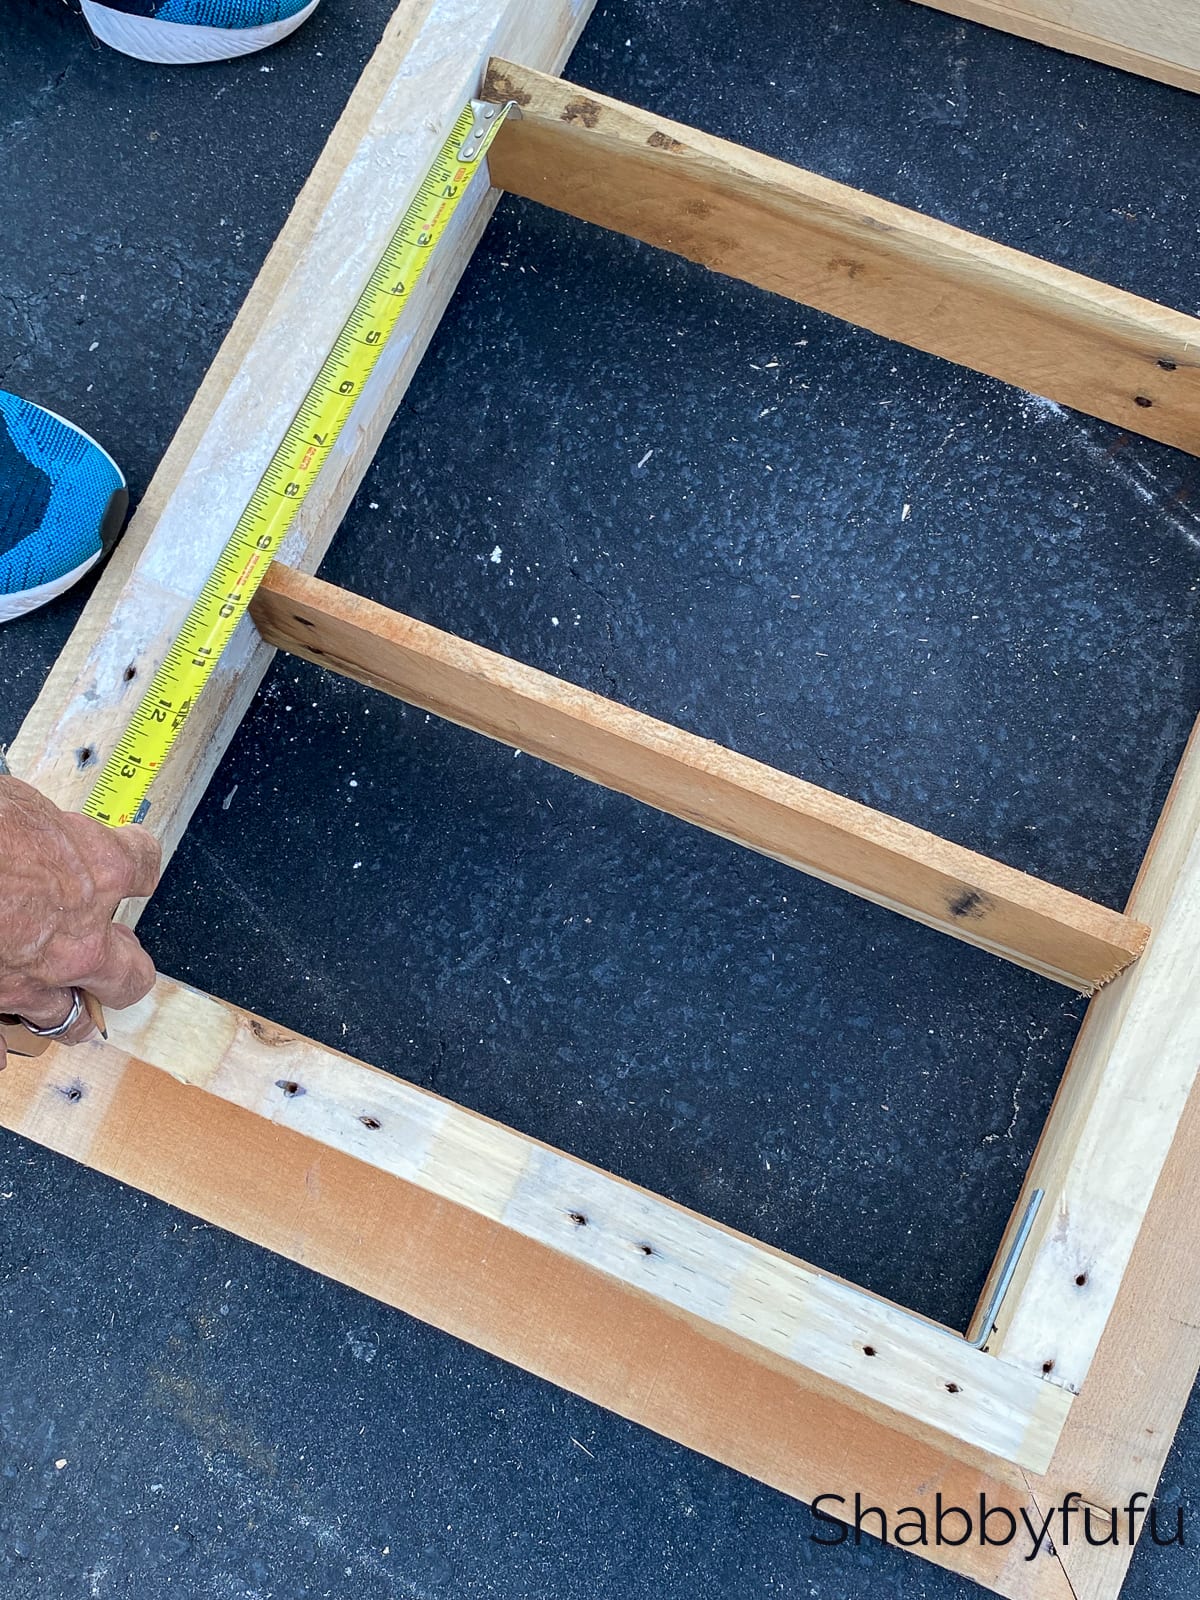 adding shelves to a pallet